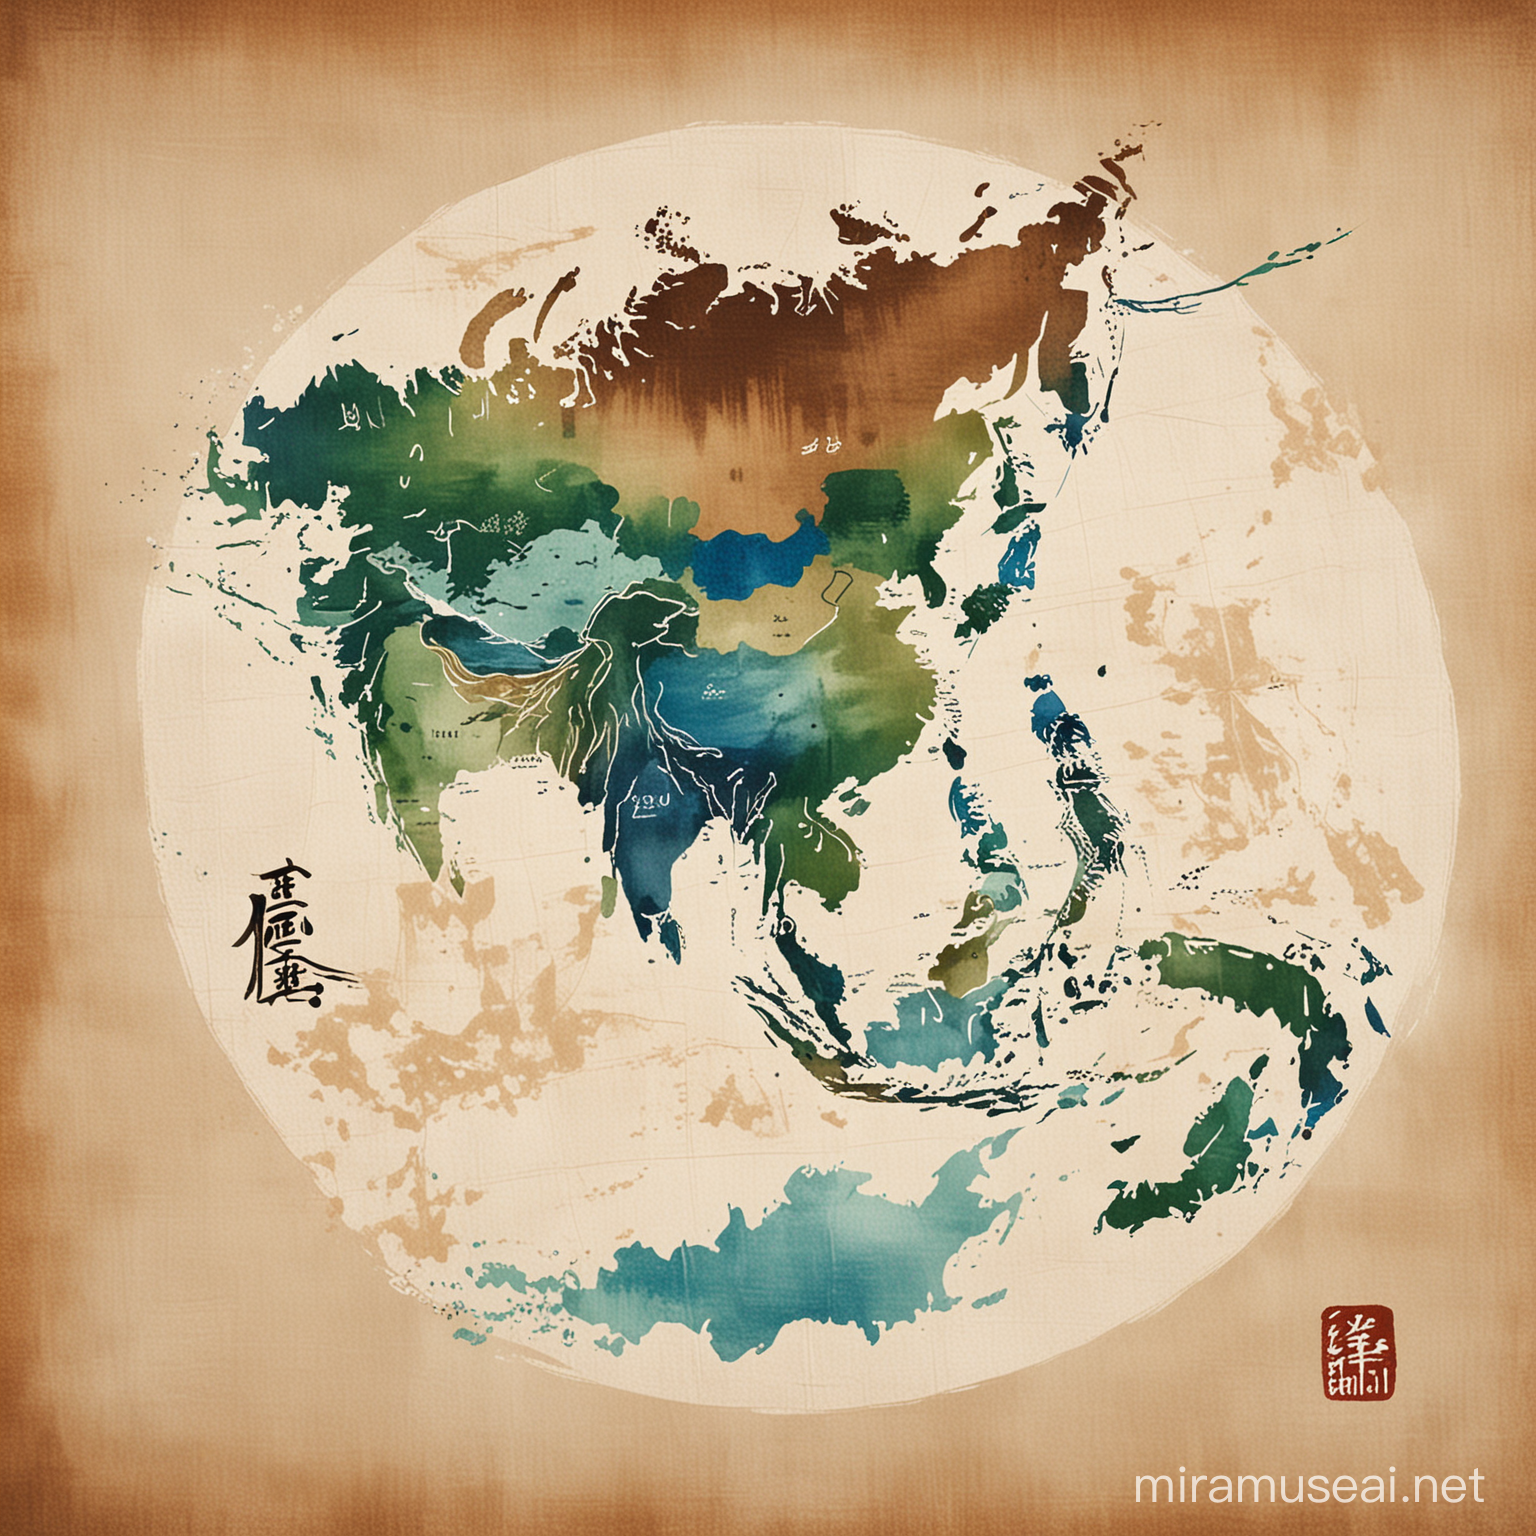 Map of Earth drawn with Japanese caligraphy brushes with brown green and blue colors on canvas